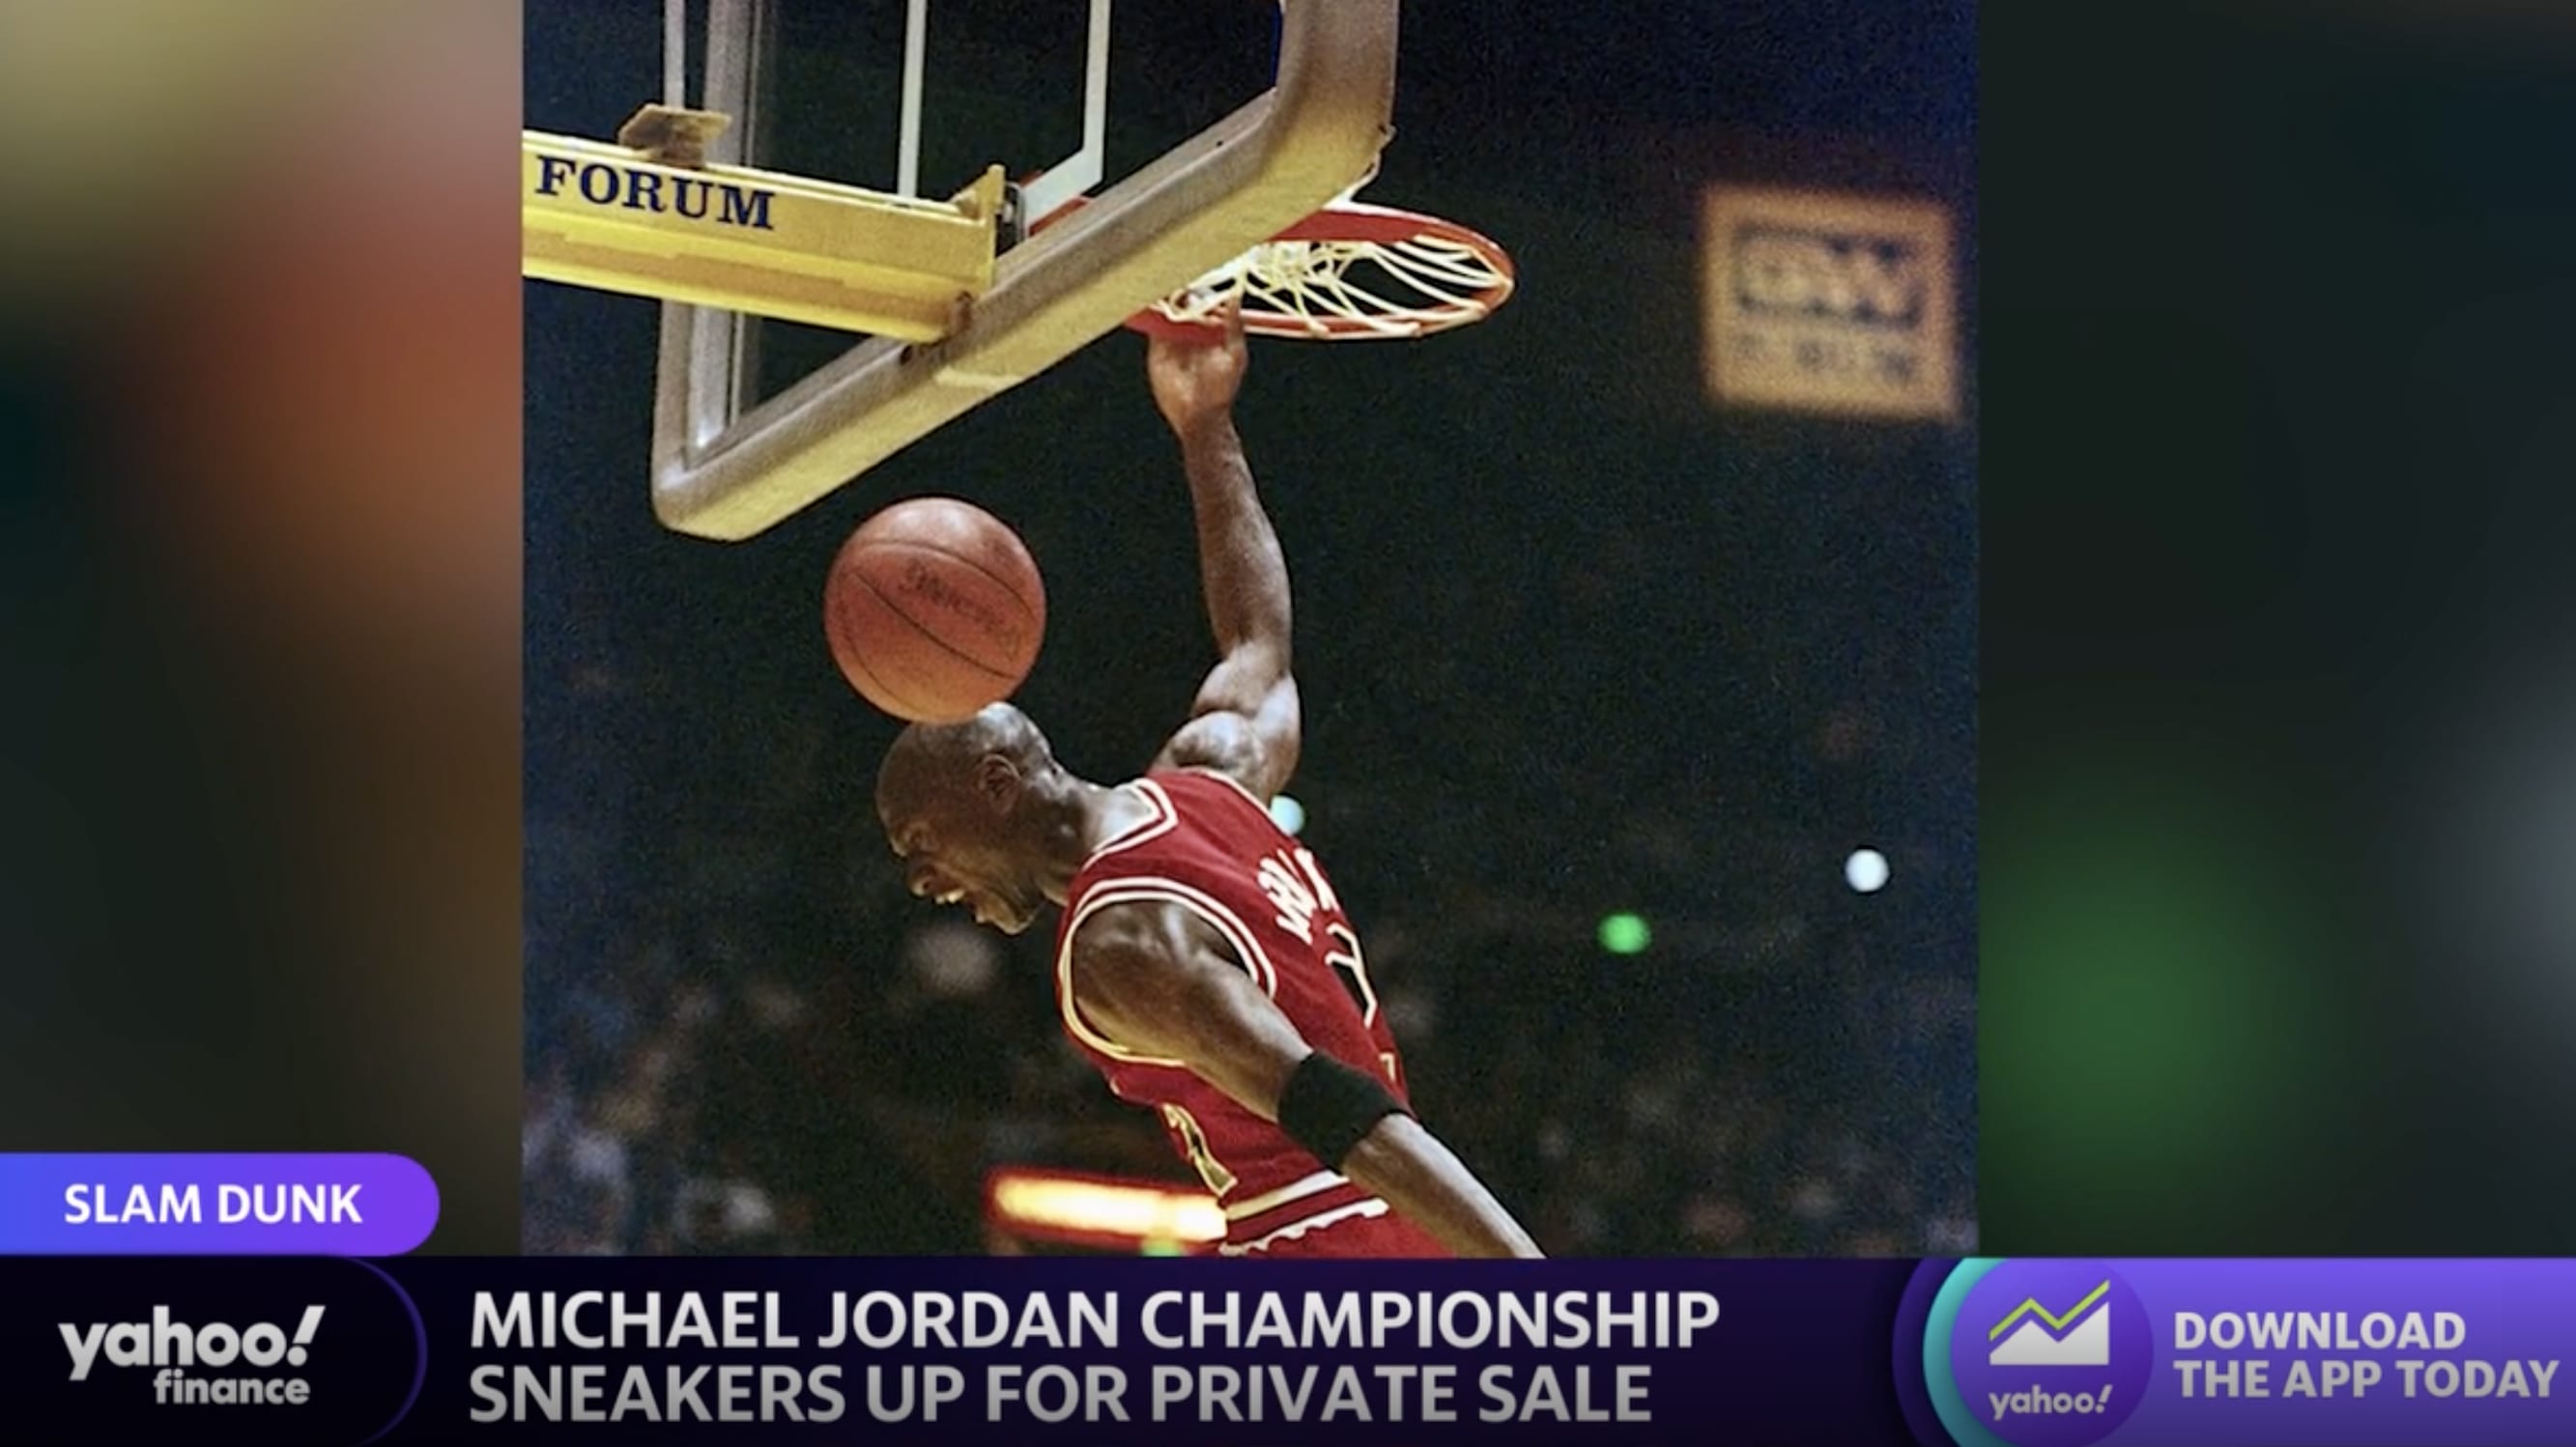 Michael Jordan's jersey from 1998 Finals to be put up for auction - CBS  Chicago